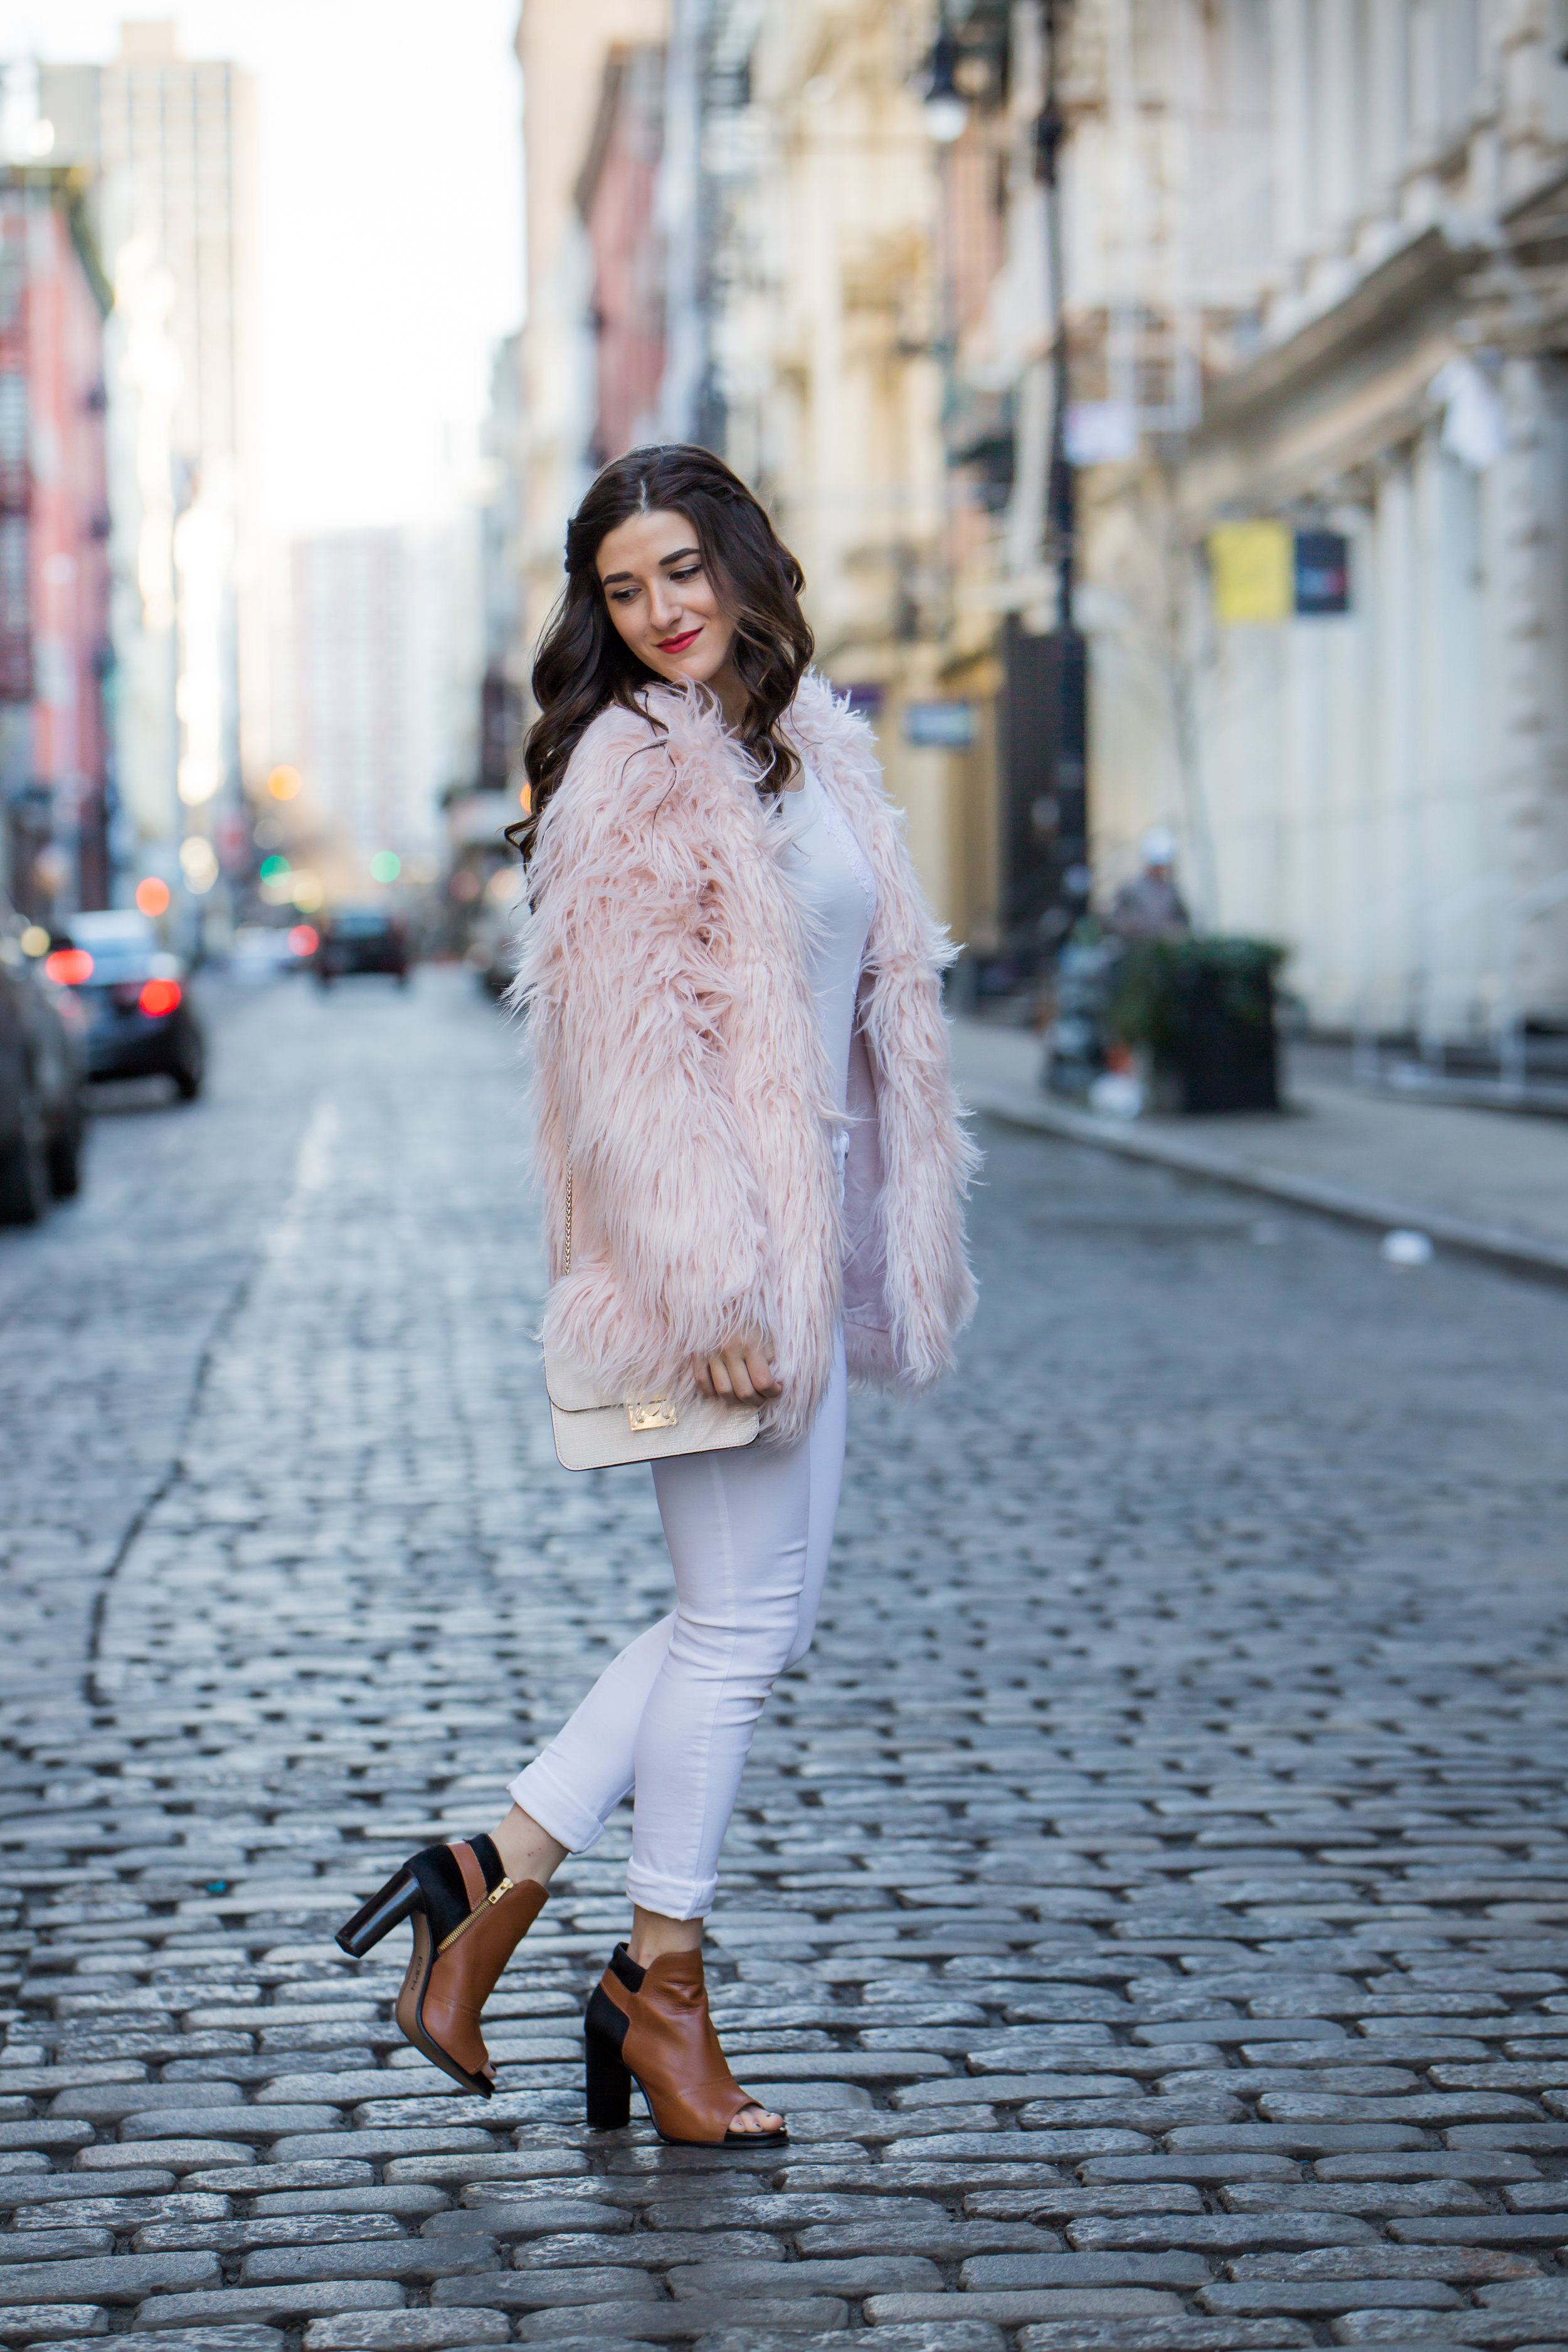 Pink Faux Fur Jacket White Jeans The Best Career Advice Esther Santer Fashion Blog NYC Street Style Blogger Outfit OOTD Trendy Winter Whites Henri Bendel Bag Tan Booties Girl Women Shop Sale Hair Shoes What To Wear Wearing Model Accessories Photoshoot.jpg